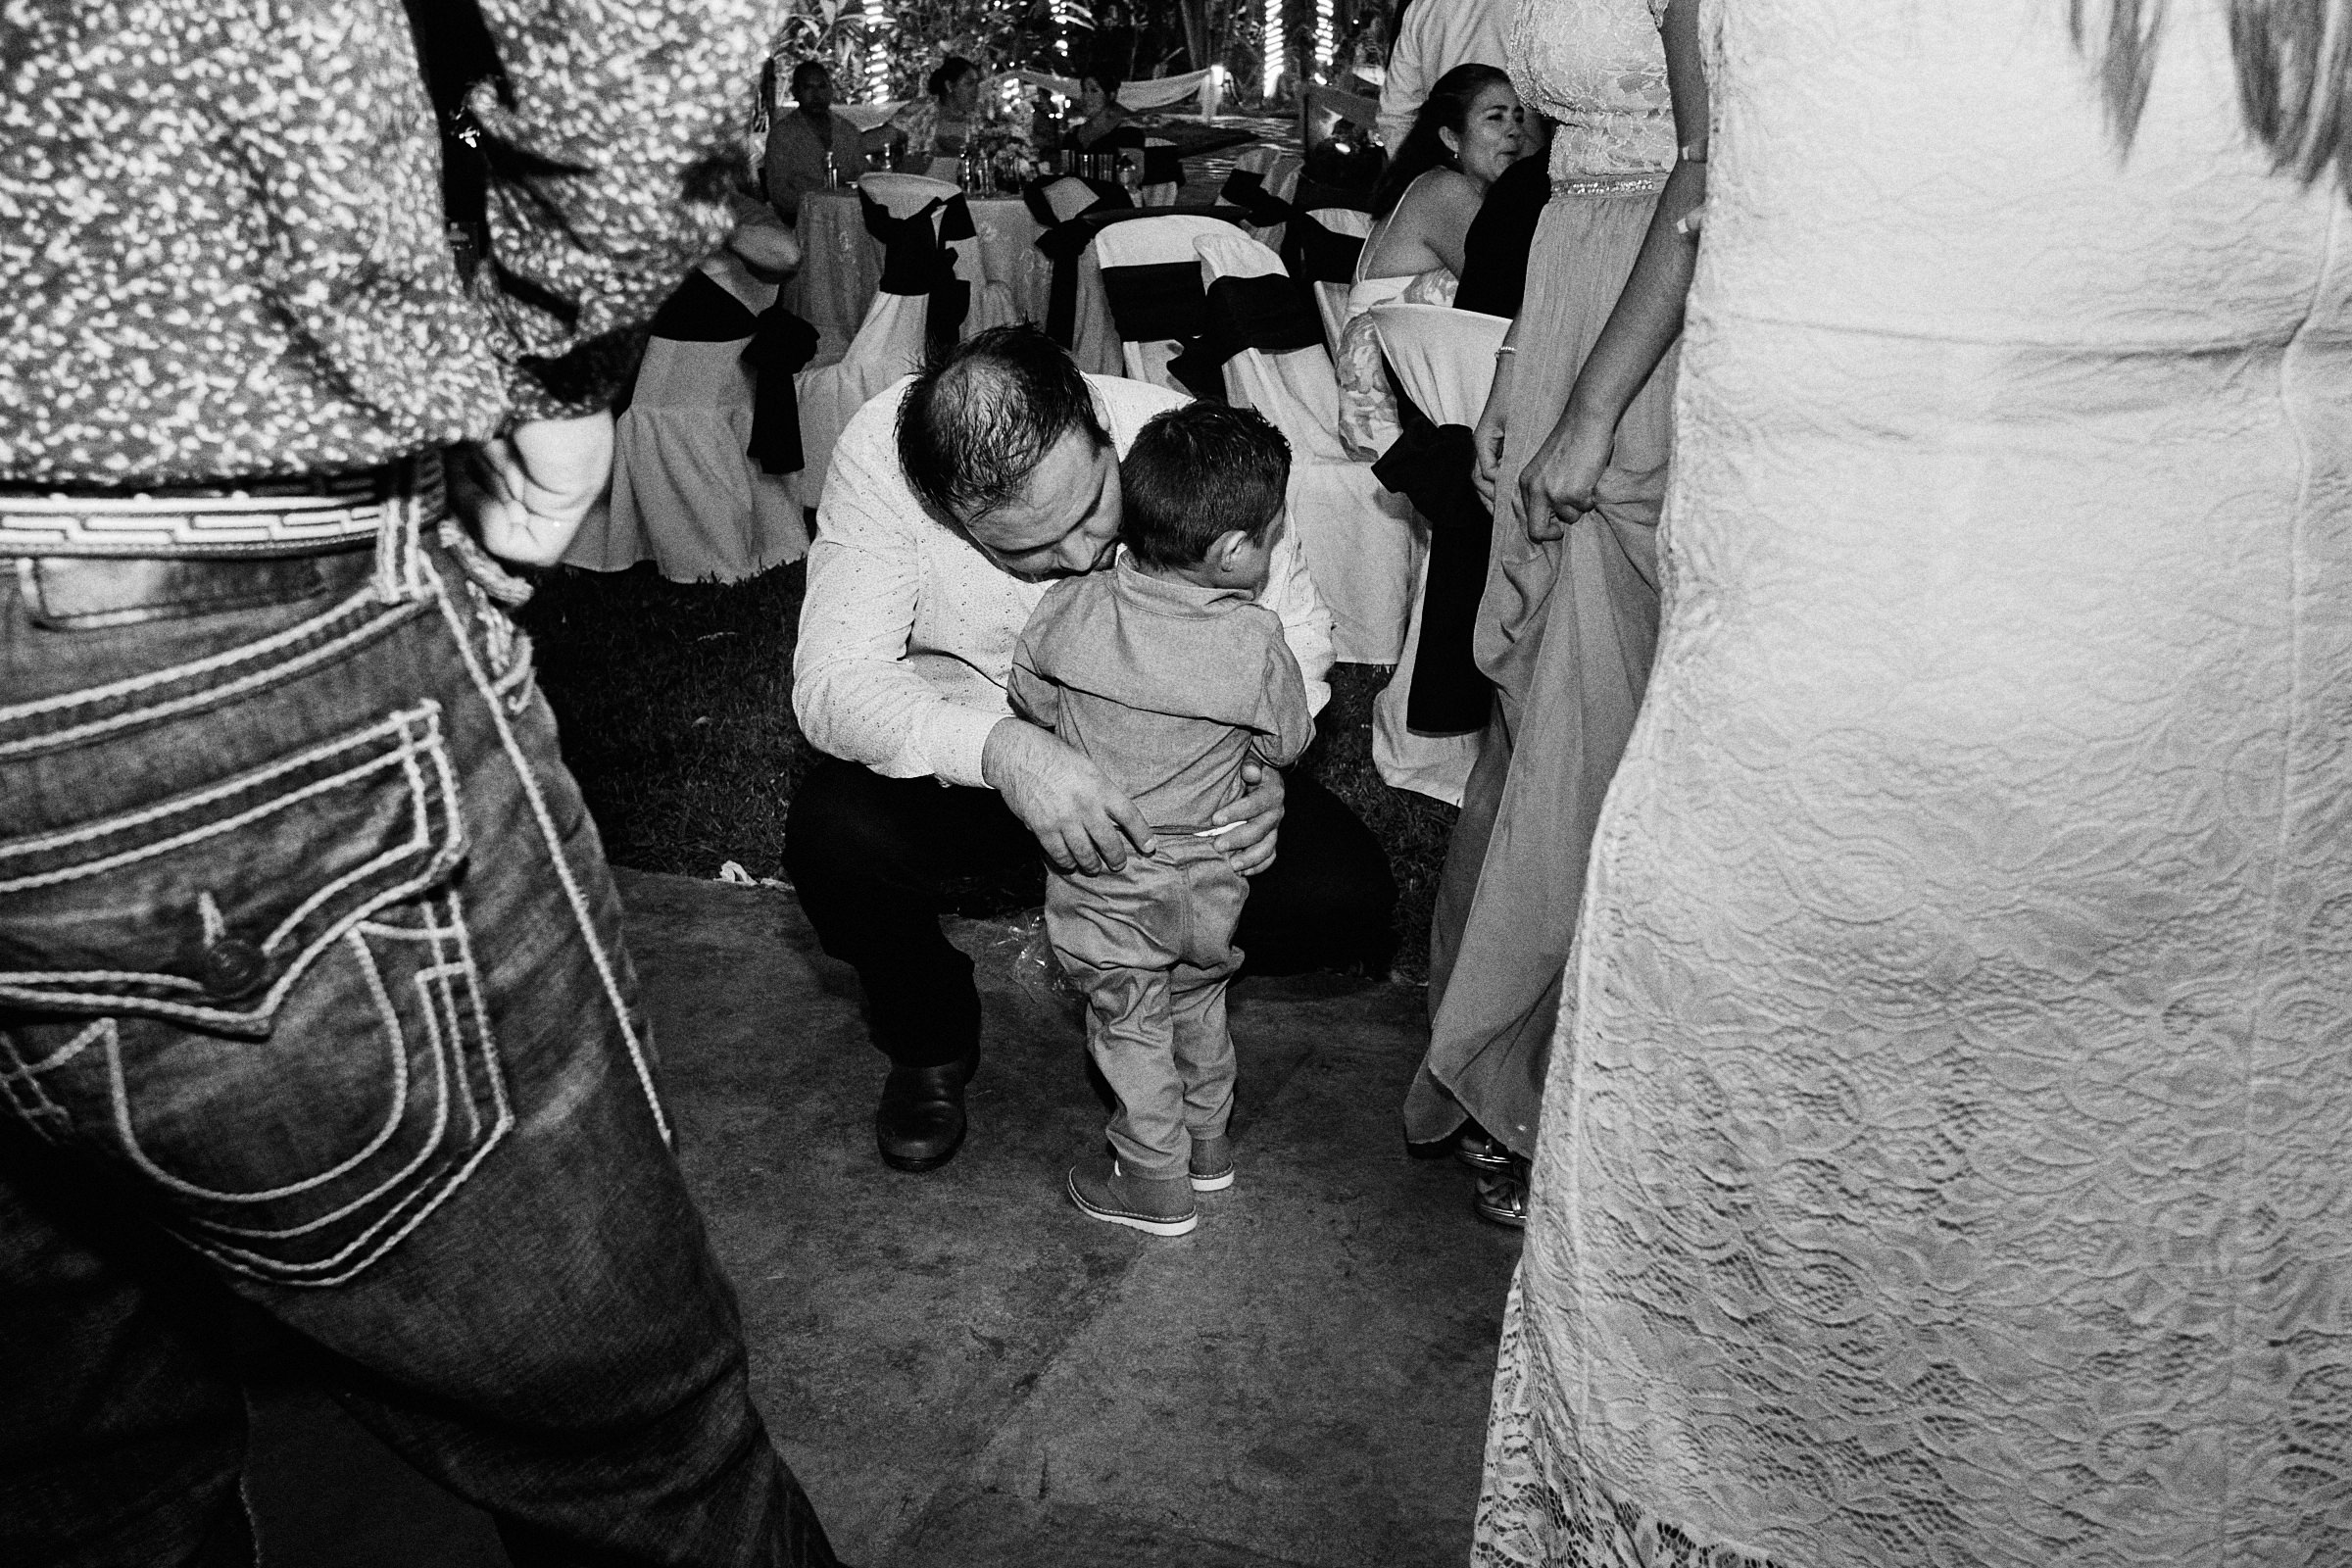 Dad Holds His Child In The Dance Floor In Black And White